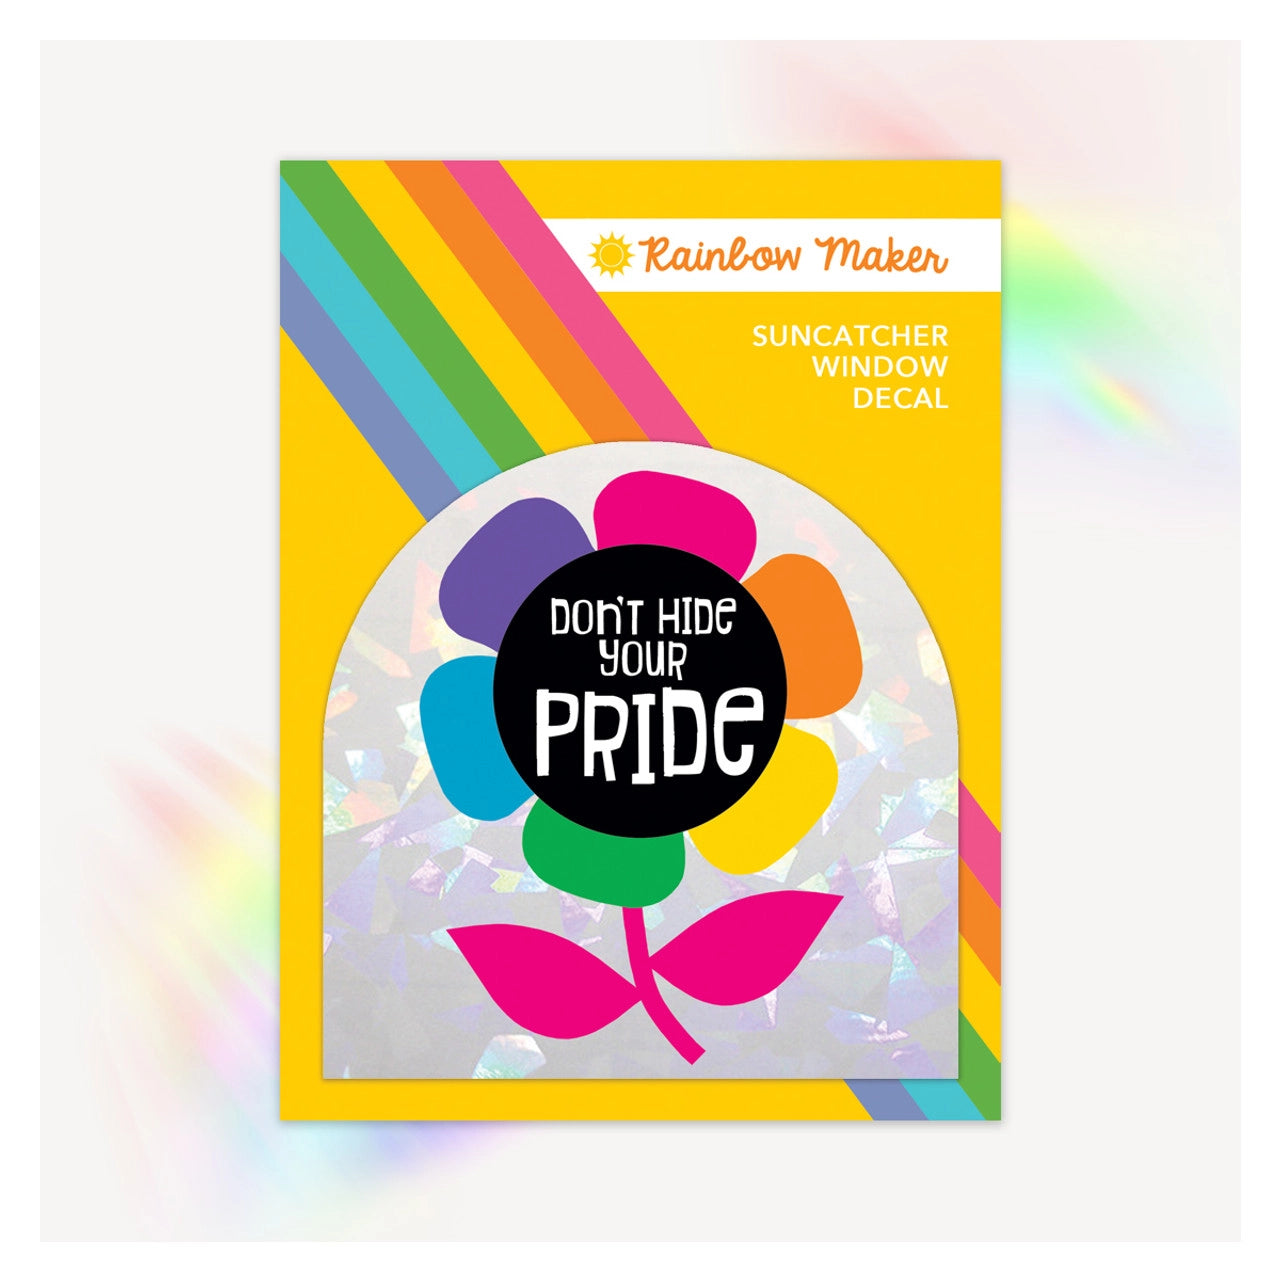 Rainbow Maker Decal - Don't Hide Your Pride